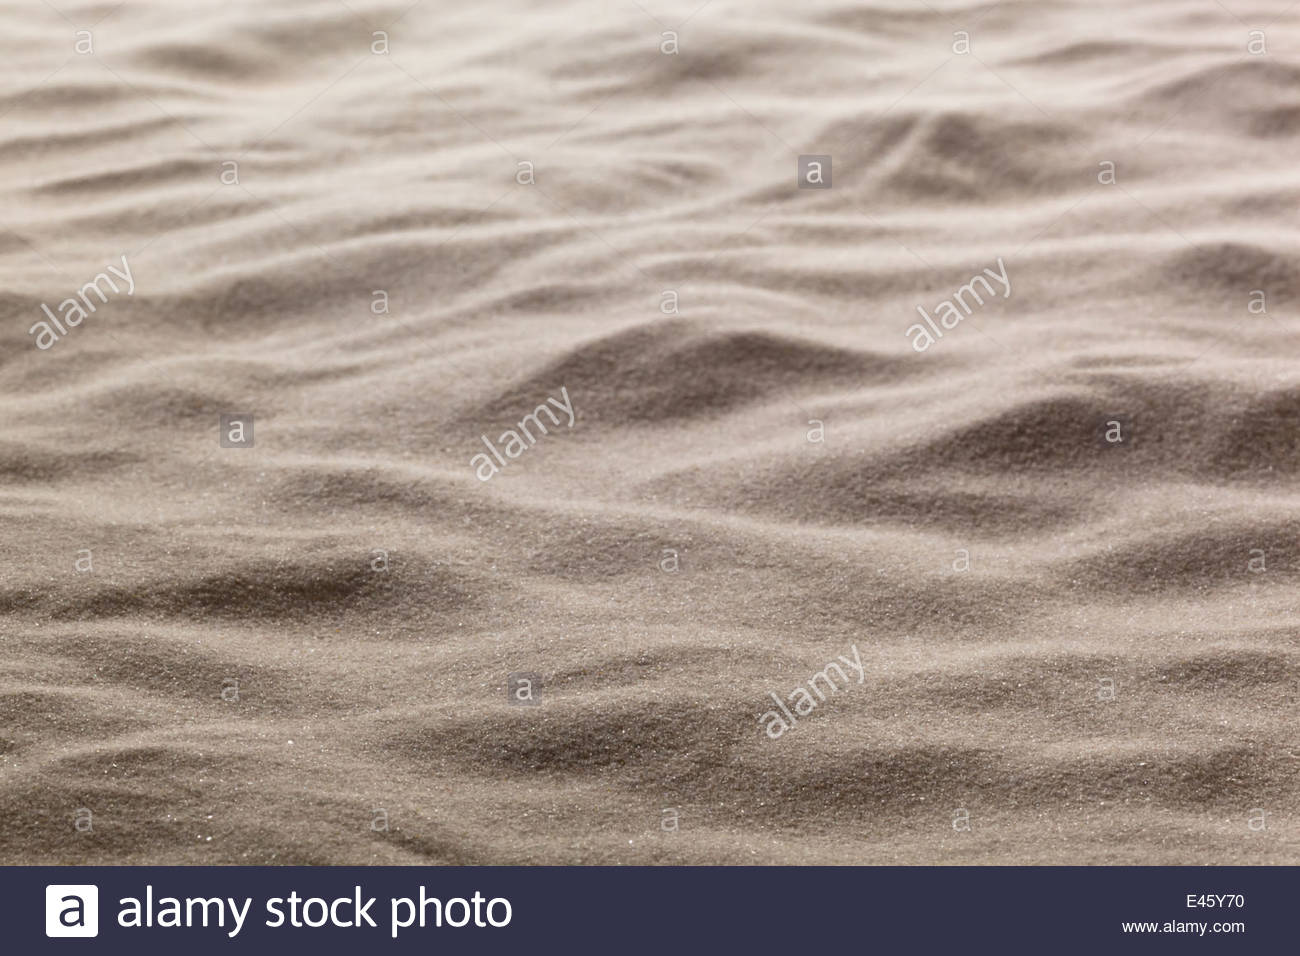 An Area Of Sand On A Sandy Beach Wallpaper And Exemption Stock